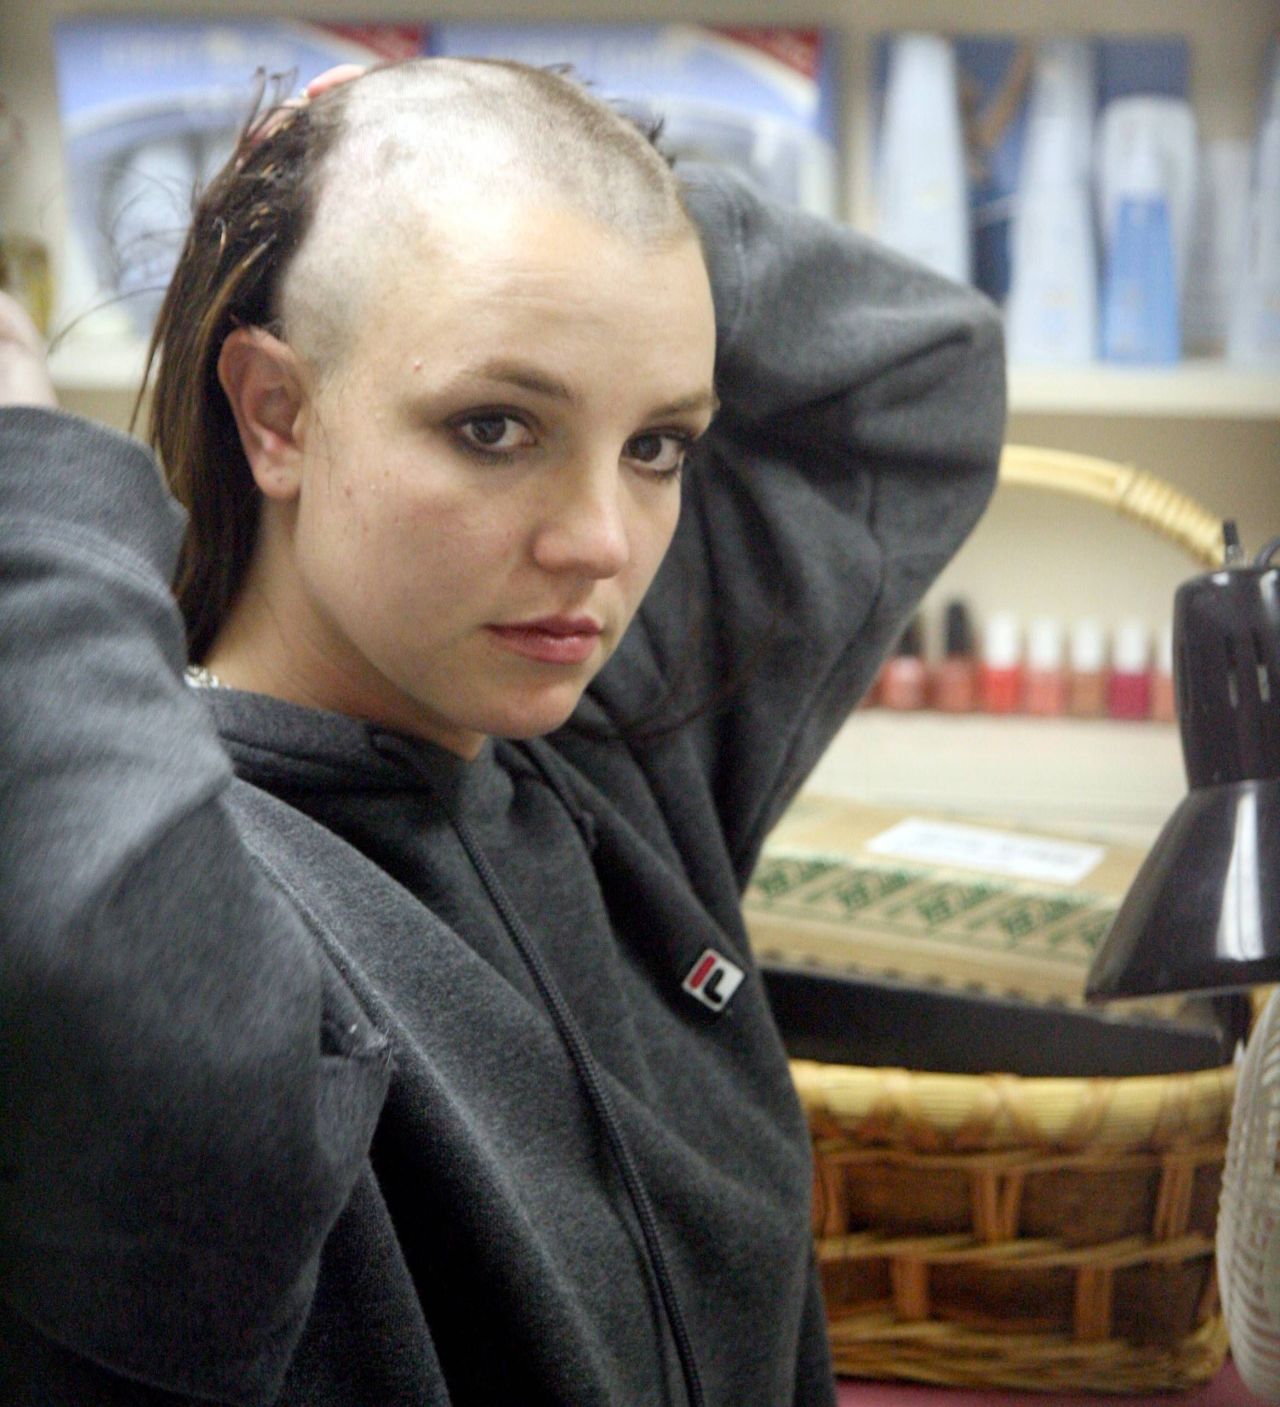 Spears shaved her head in 2007. Headlines at the time focused on whether the star was in the midst of a breakdown.